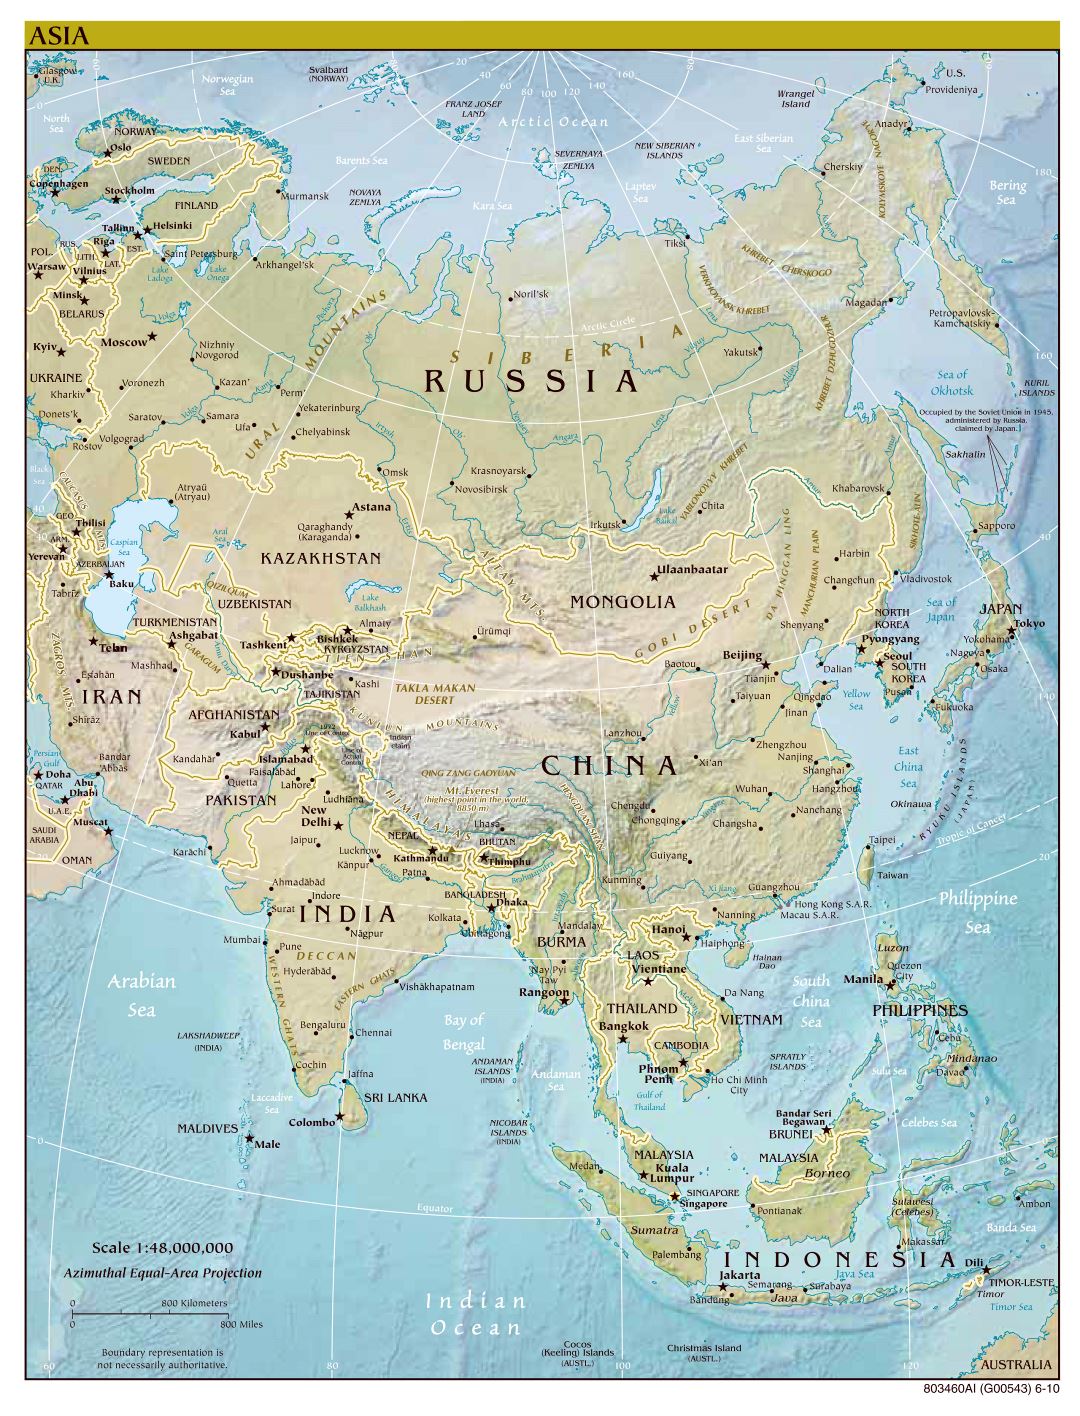 Large scale political map of Asia with relief, major cities and capitals - 2010